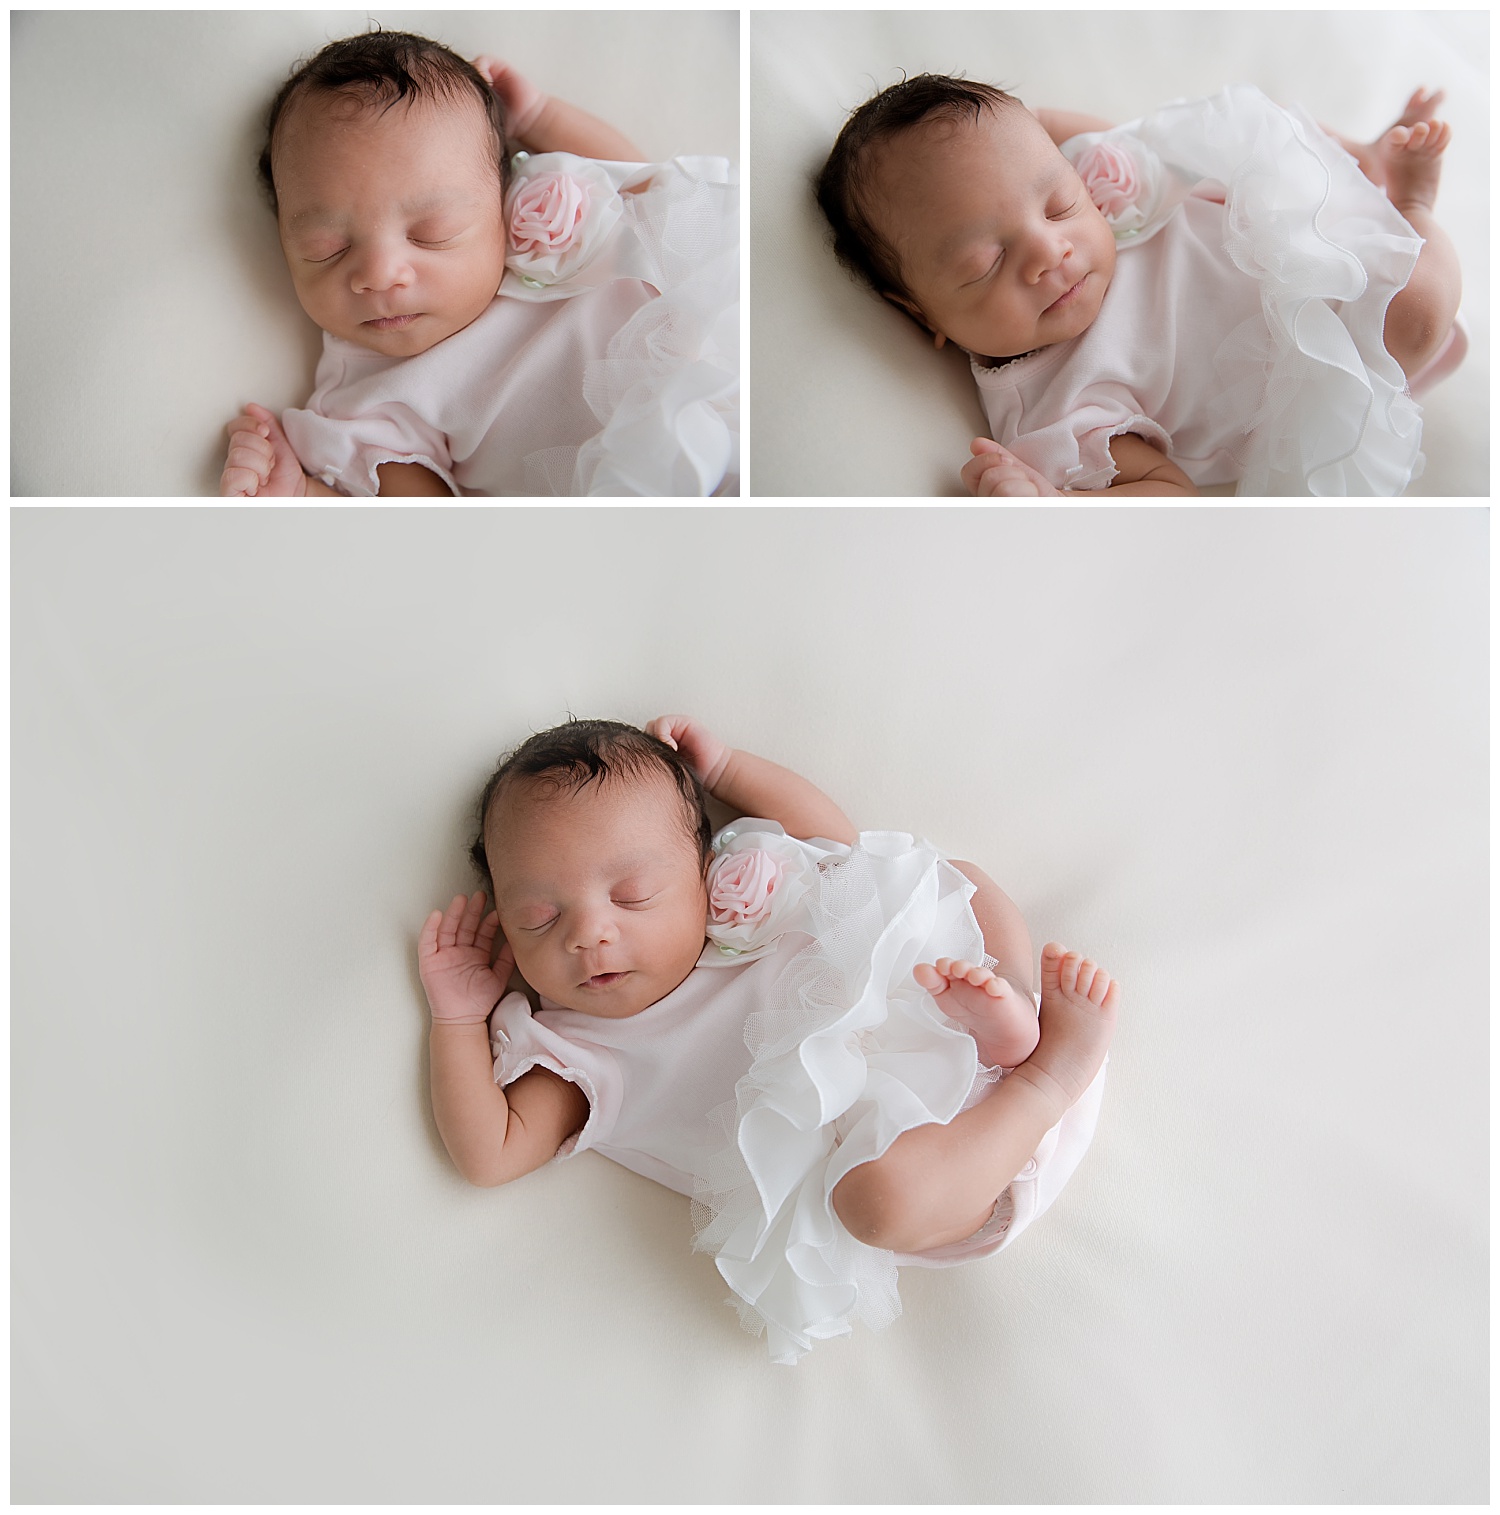 baby girl wearing a dress for her first photo shoot